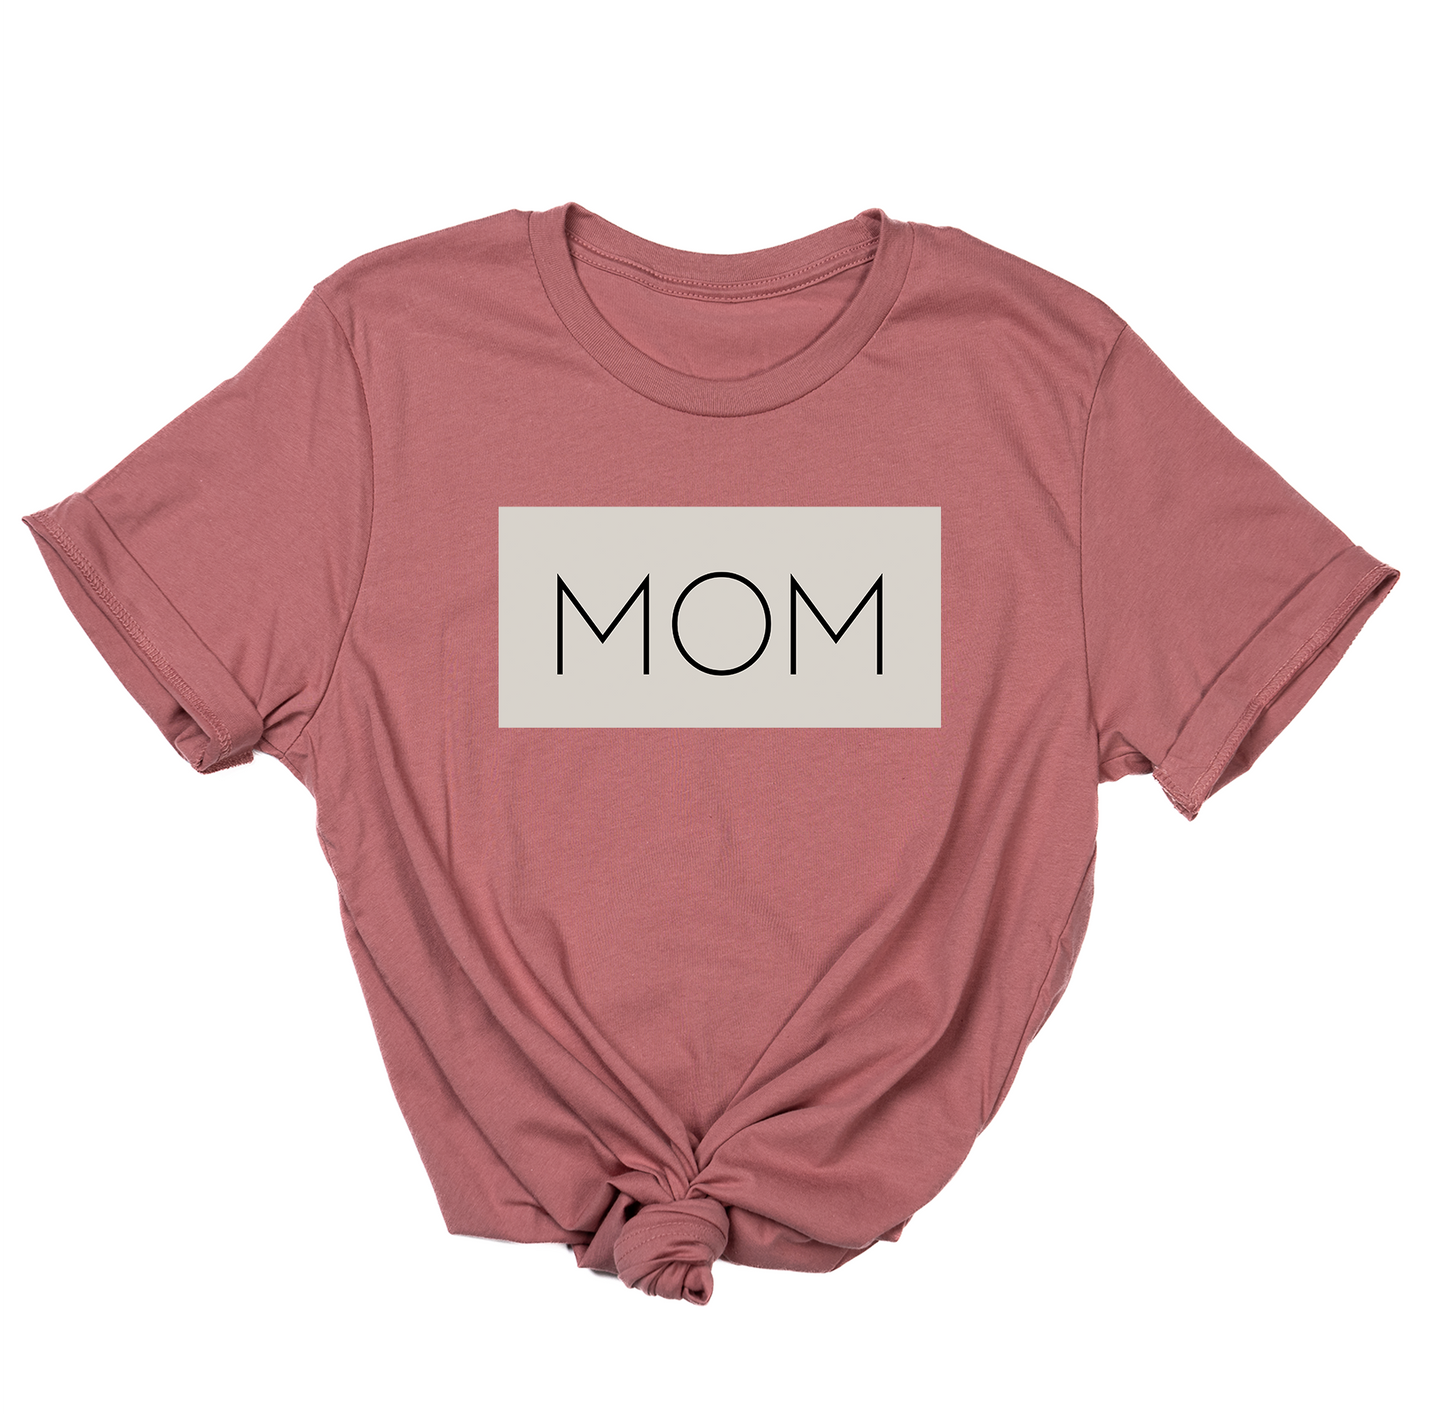 Mom (Boxed Collection, Stone Box/Black Text, Across Front) - Tee (Mauve)